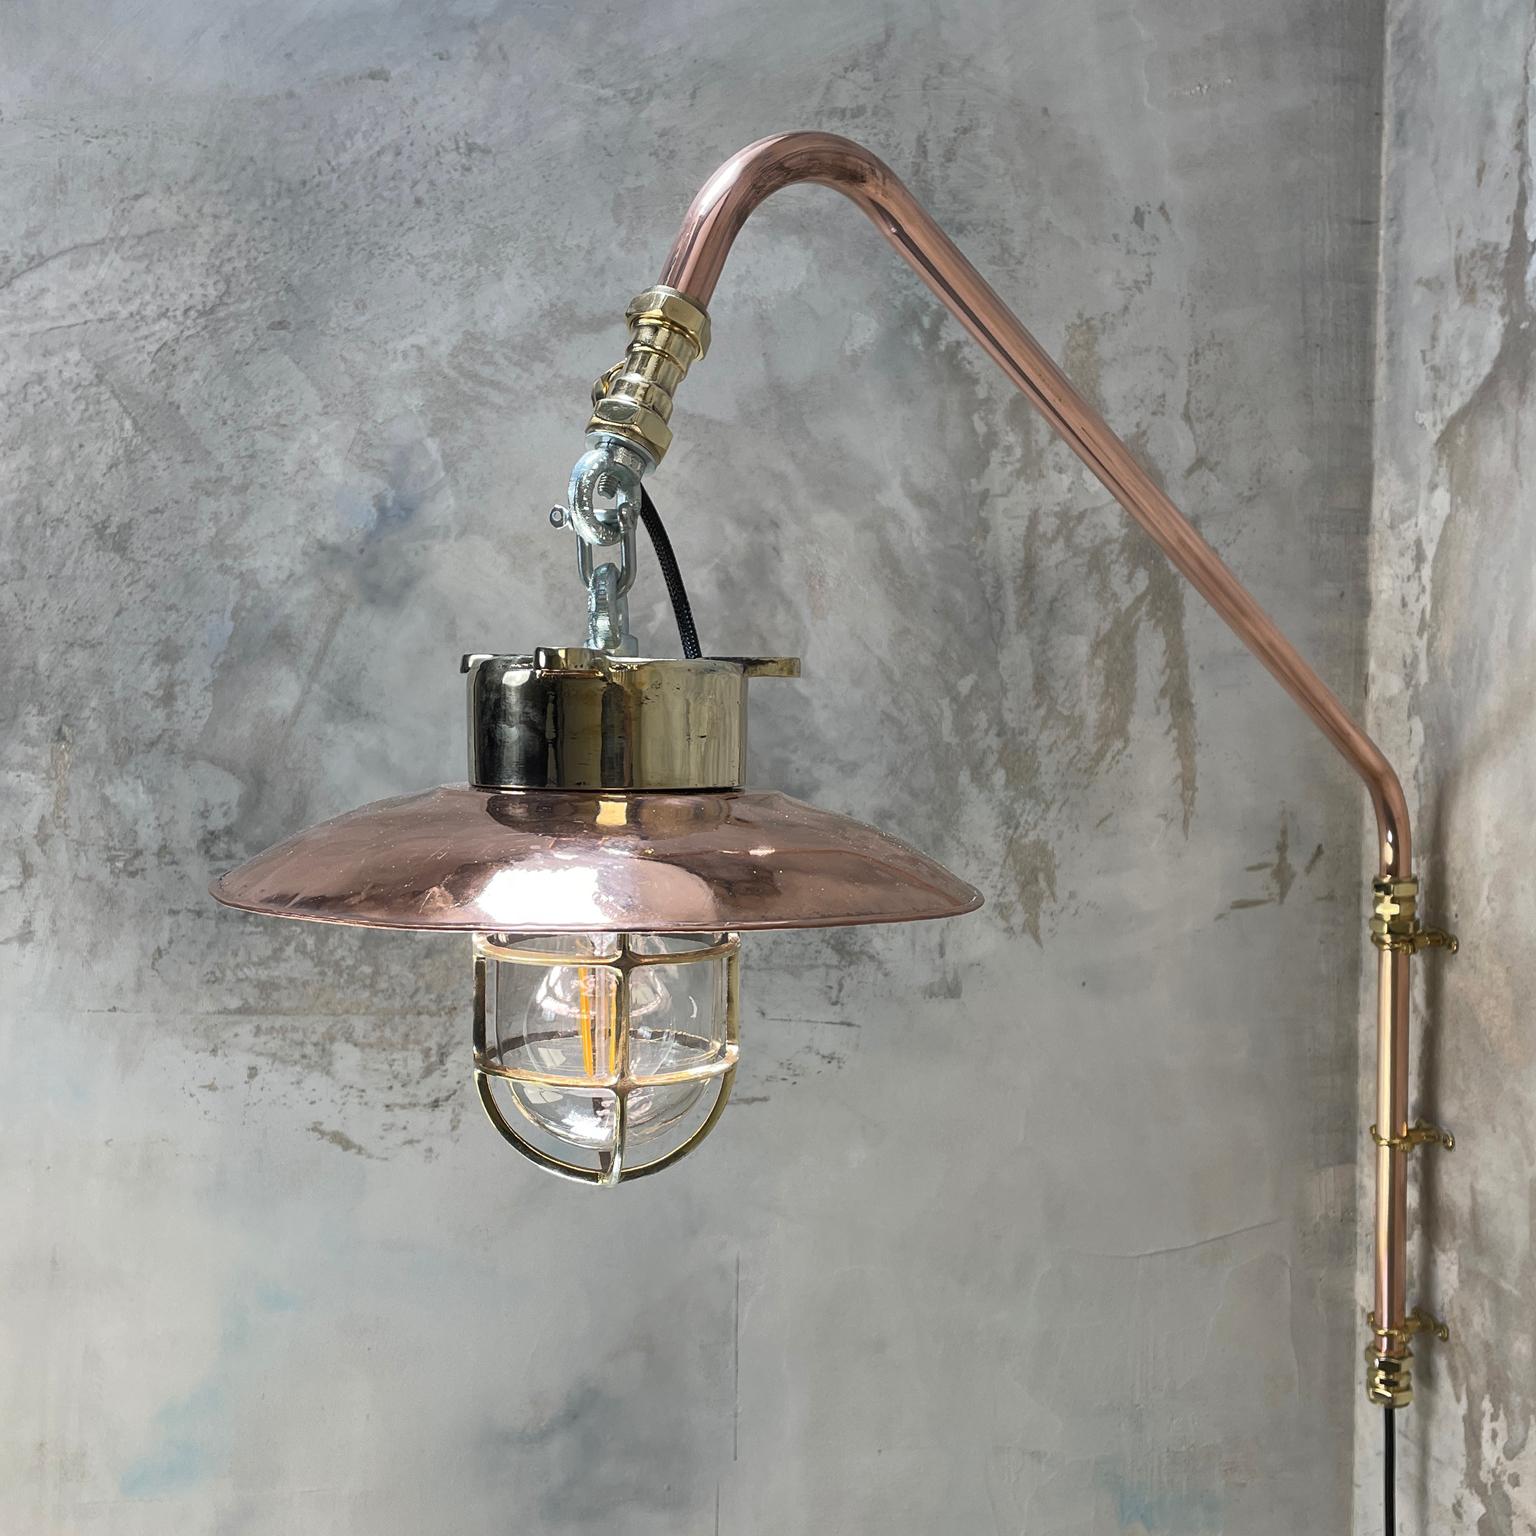 Late 20th Century 1970s Copper & Brass Cantilever Explosion Proof Pendant Lamp with Cage and Shade For Sale